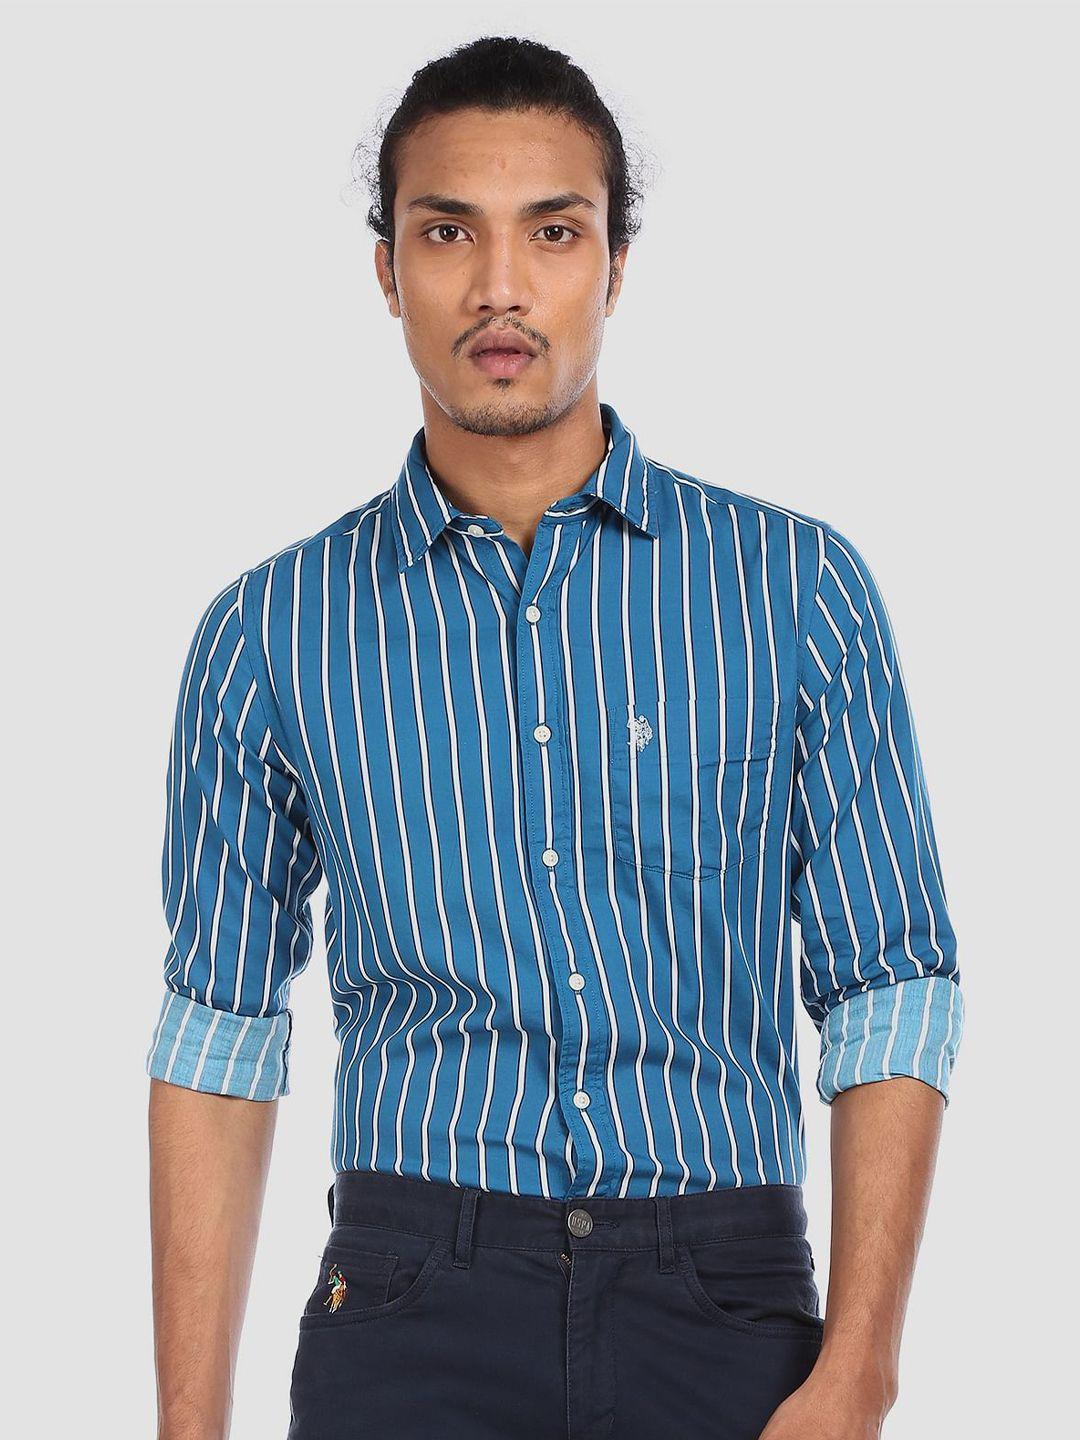 u.s. polo assn. men teal blue & white tailored fit striped casual shirt